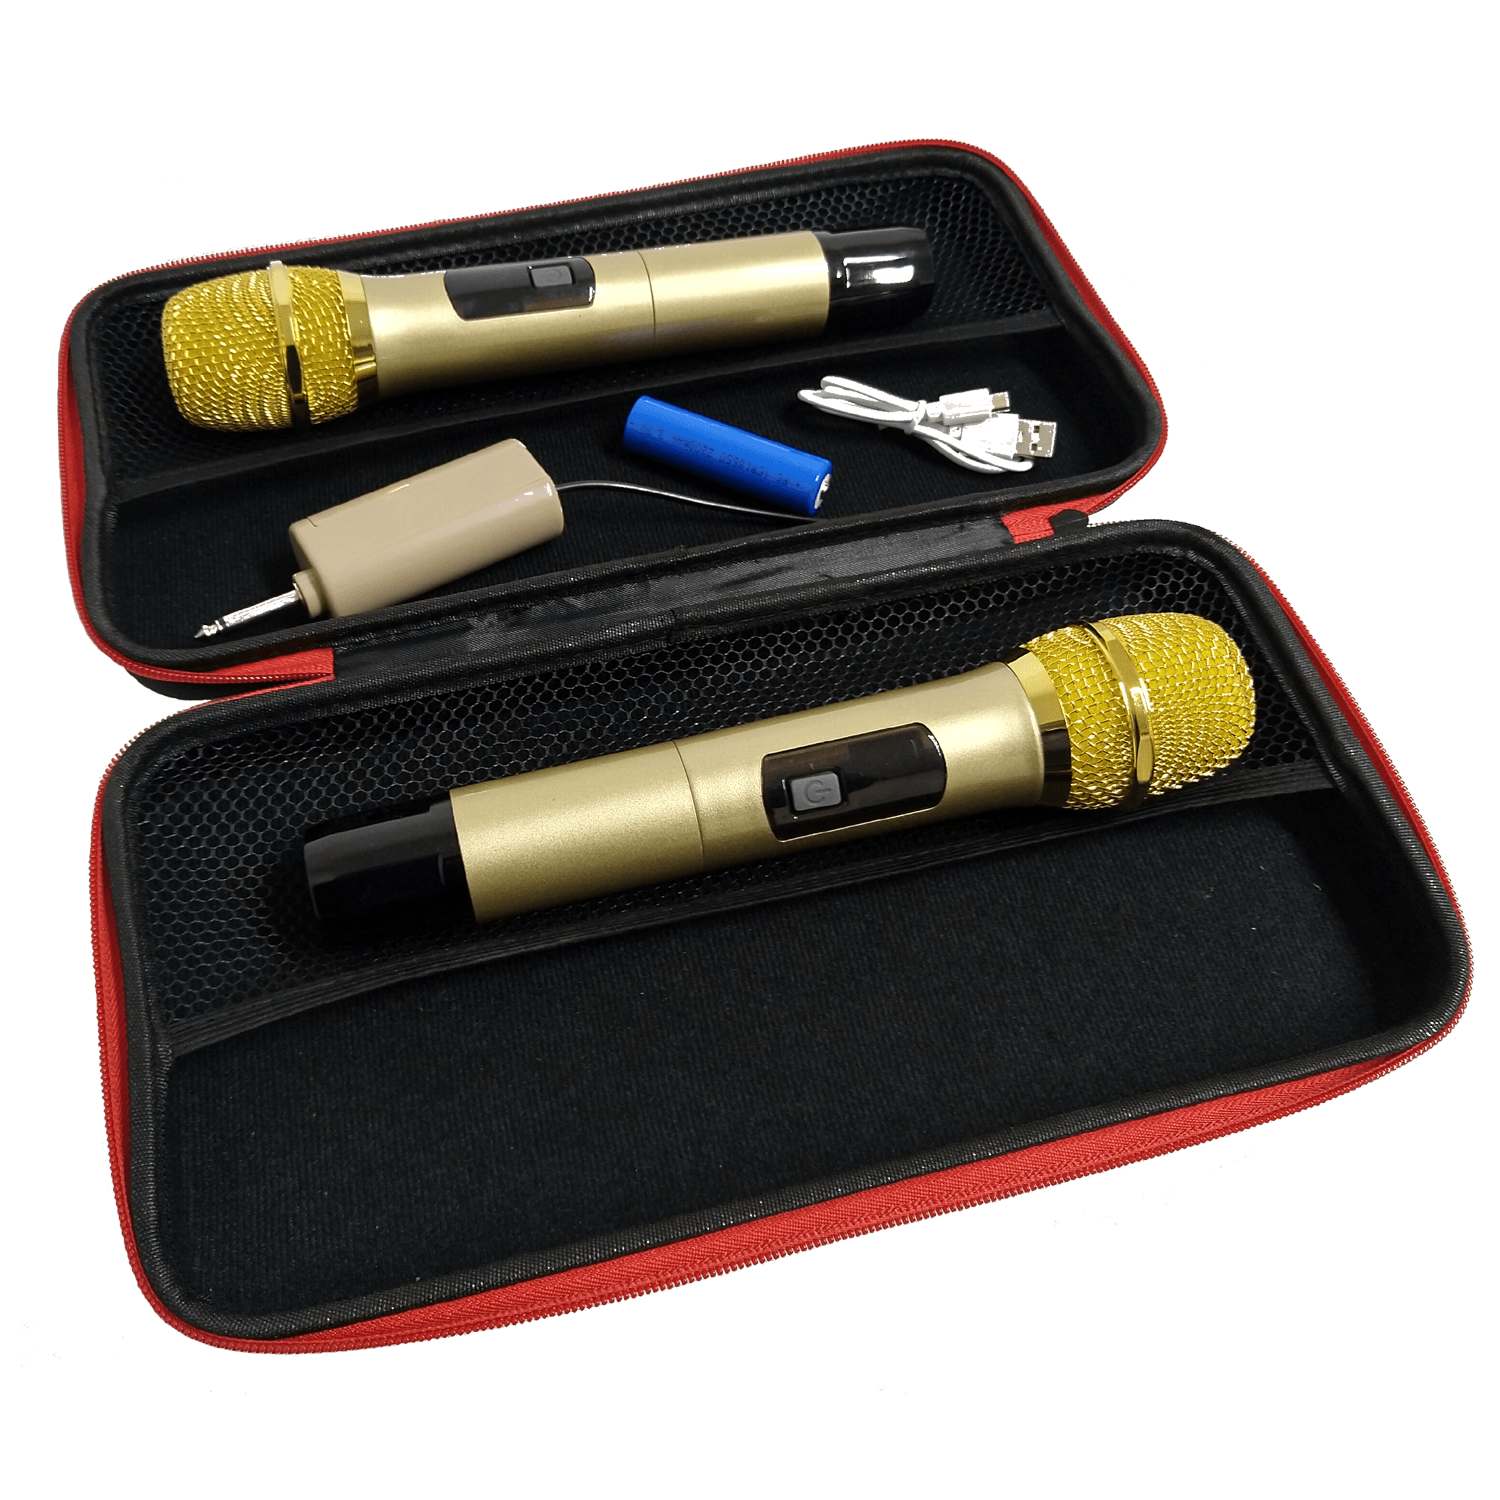 Sonken EZY MIC Series 2 Pro UHF Wireless Microphones (2) and (USB) Rechargeable Receiver Unit + Case - Karaoke Home Entertainment